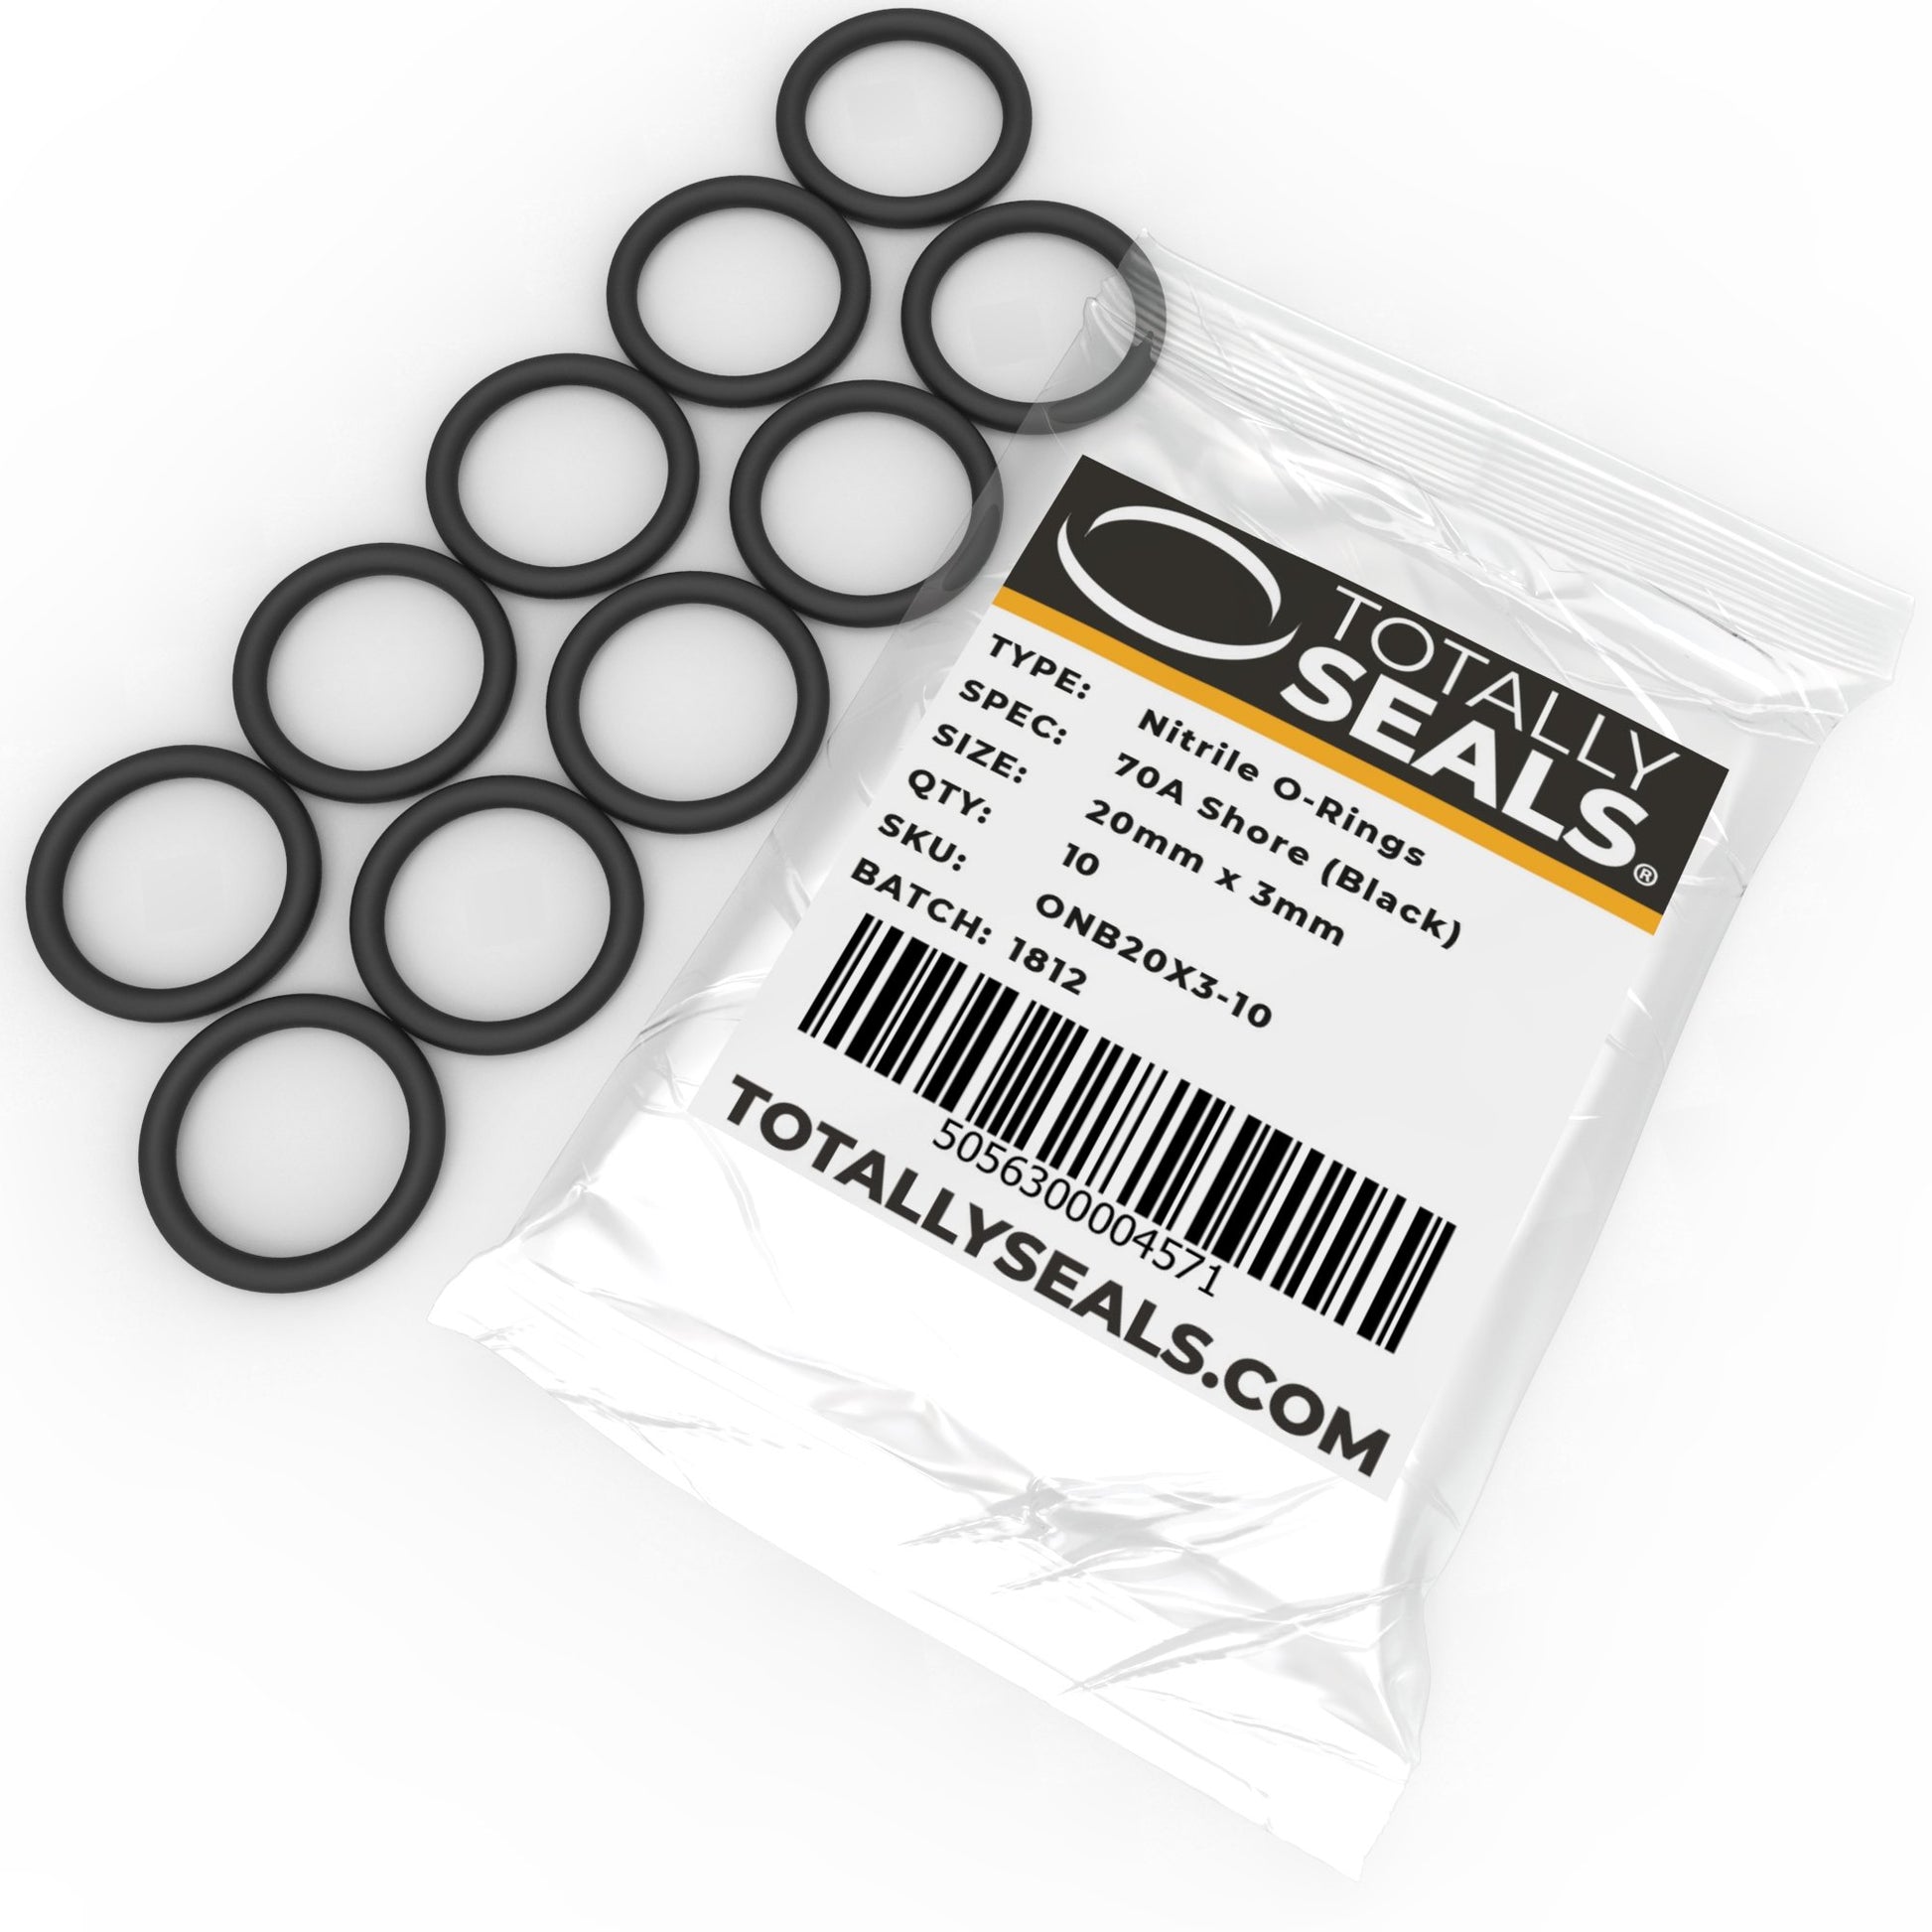 20mm x 3mm (26mm OD) Nitrile O-Rings - Totally Seals®